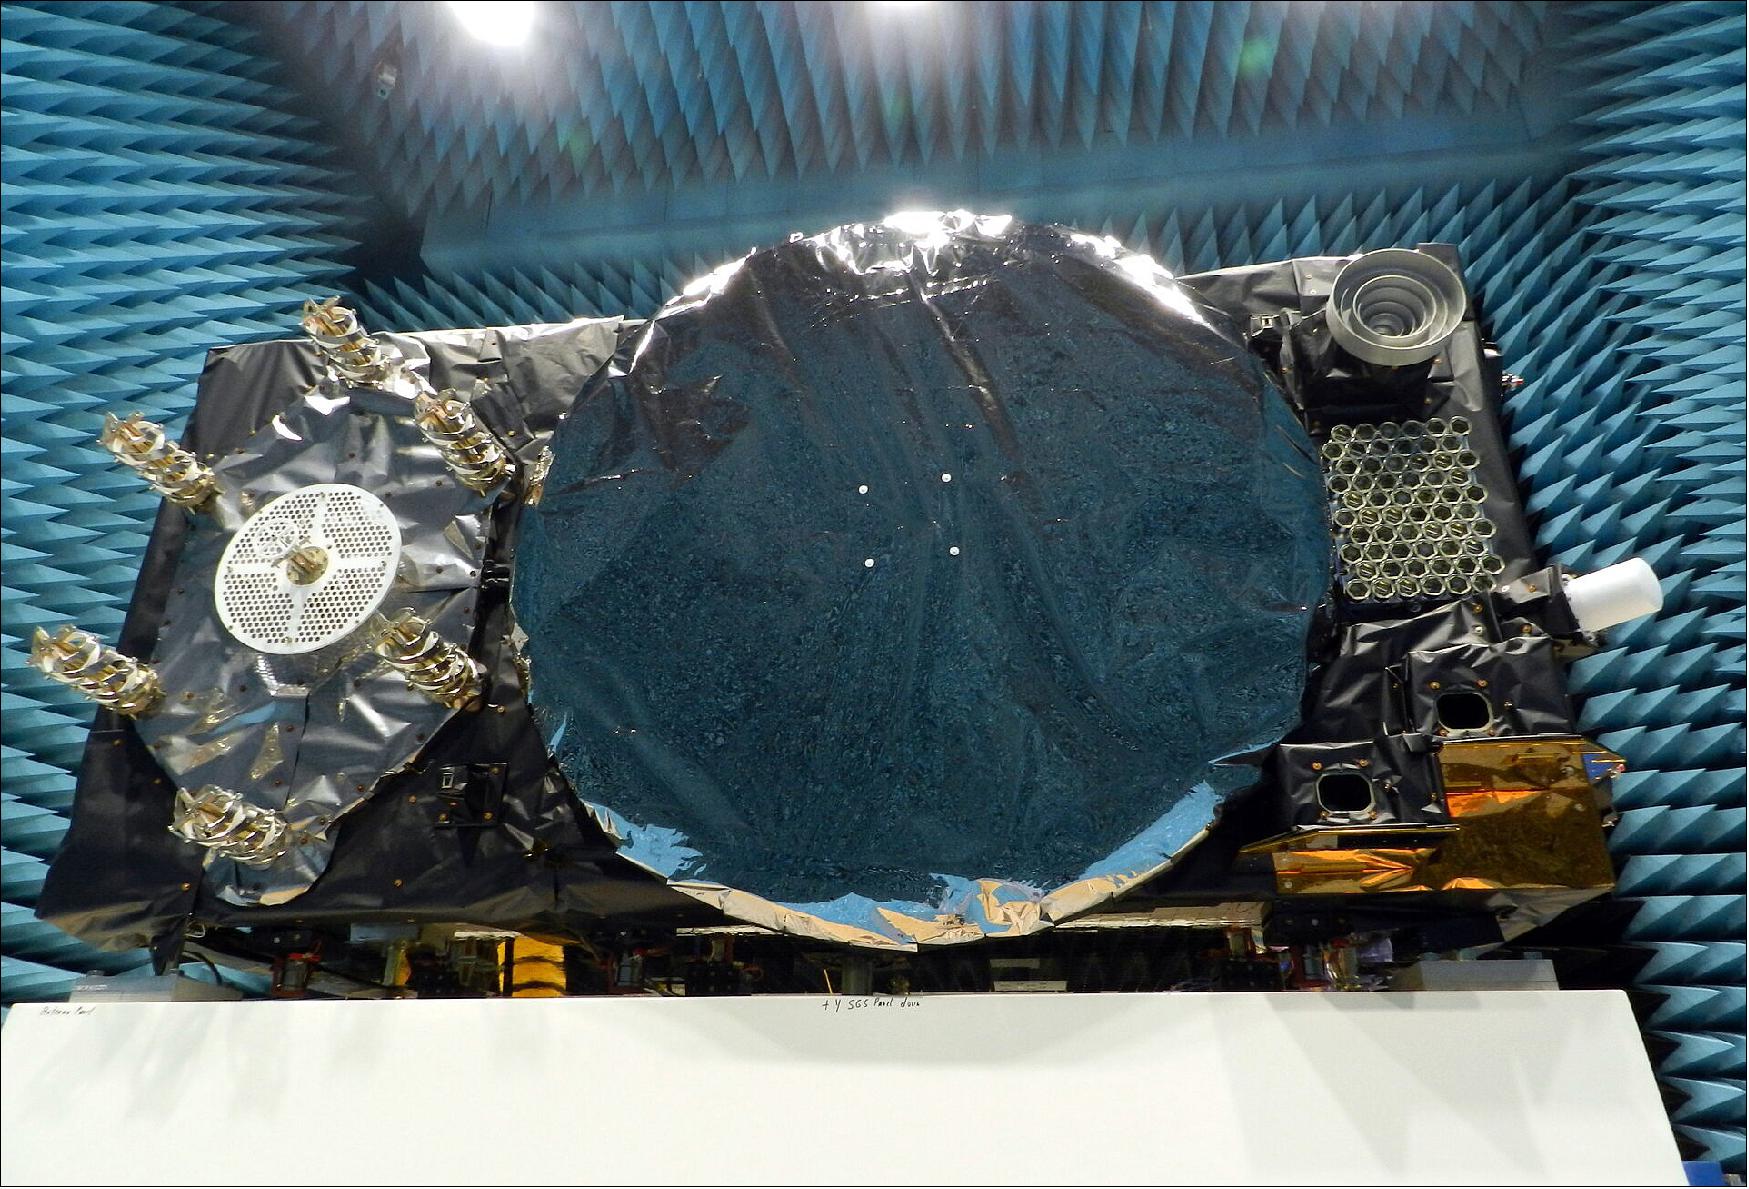 Figure 6: Seen here sheathed in multi-layer insulation, the 2.5 m by 1.2 m by 1.1 m satellite's main 1.4-m diameter antenna transmits L-band navigation signals down to Earth. To its left is the hexagonal search and rescue antenna that picks up distress signals and relays them to local emergency services, contributing to the saving of more than 2000 lives annually (image credit: ESA-P. Muller)